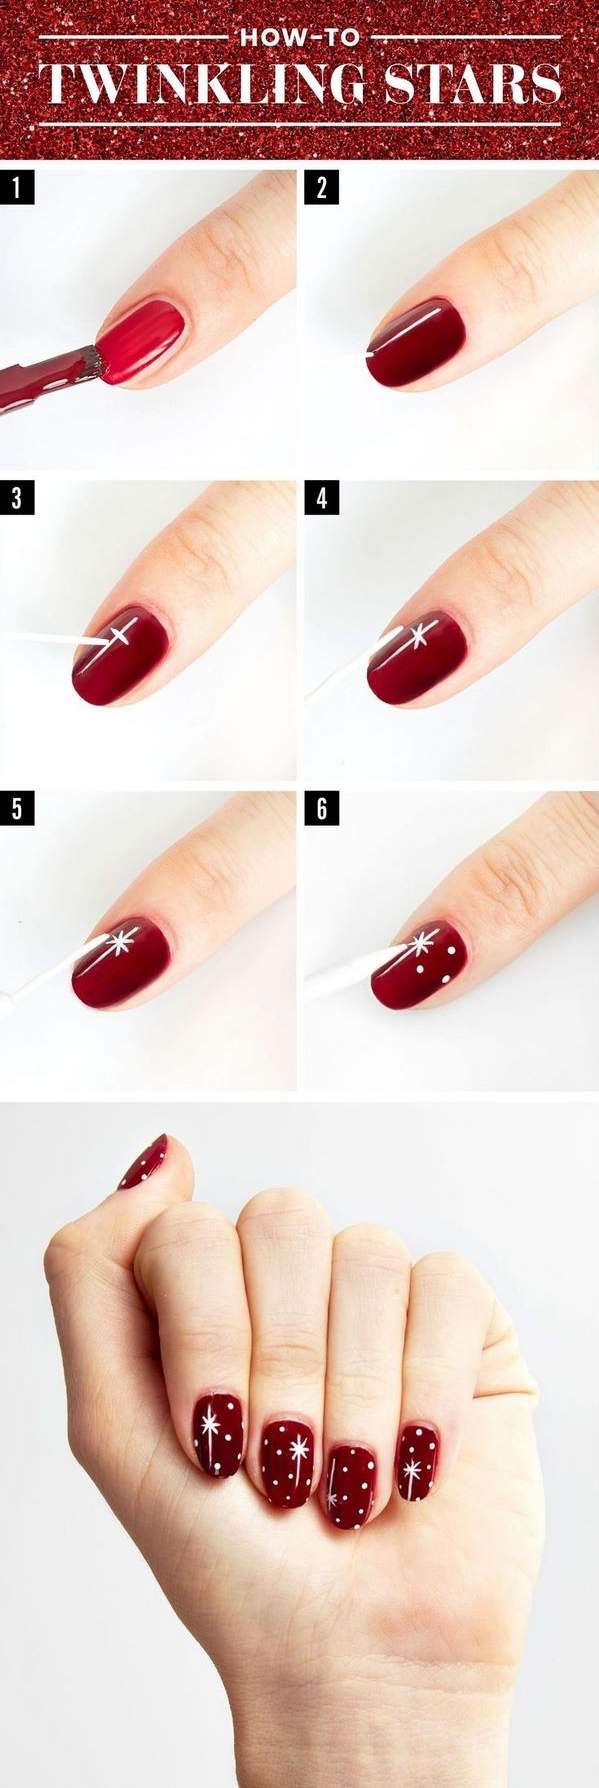 how to draw twinkling star on nails